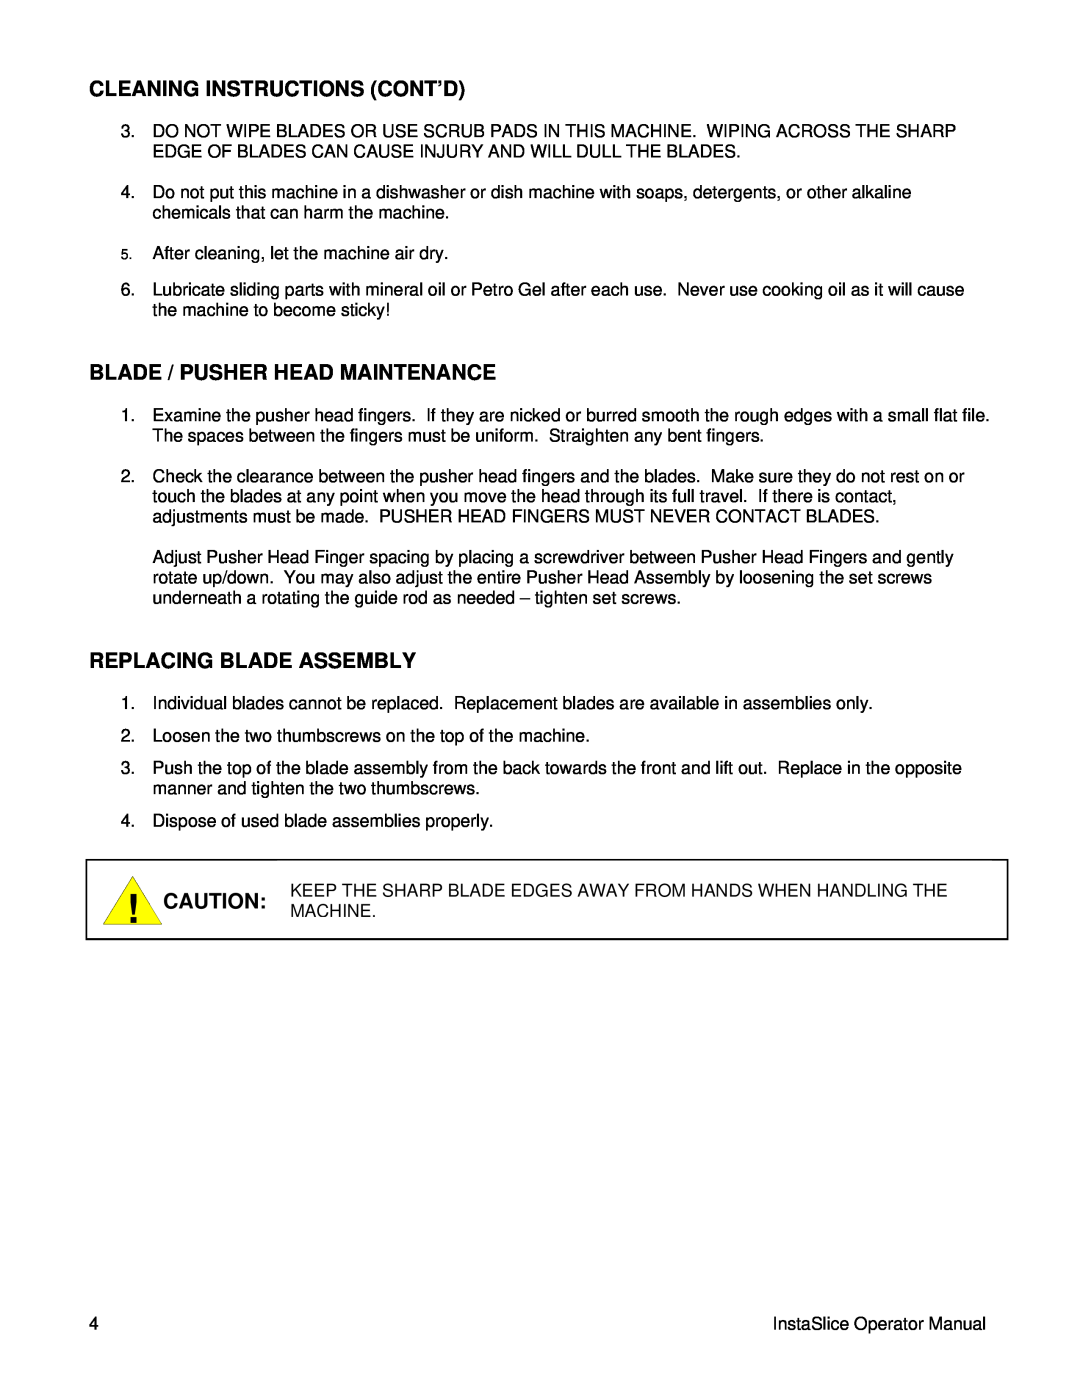 Lincoln 2806405 warranty Cleaning Instructions Cont’D, Blade / Pusher Head Maintenance, Replacing Blade Assembly 